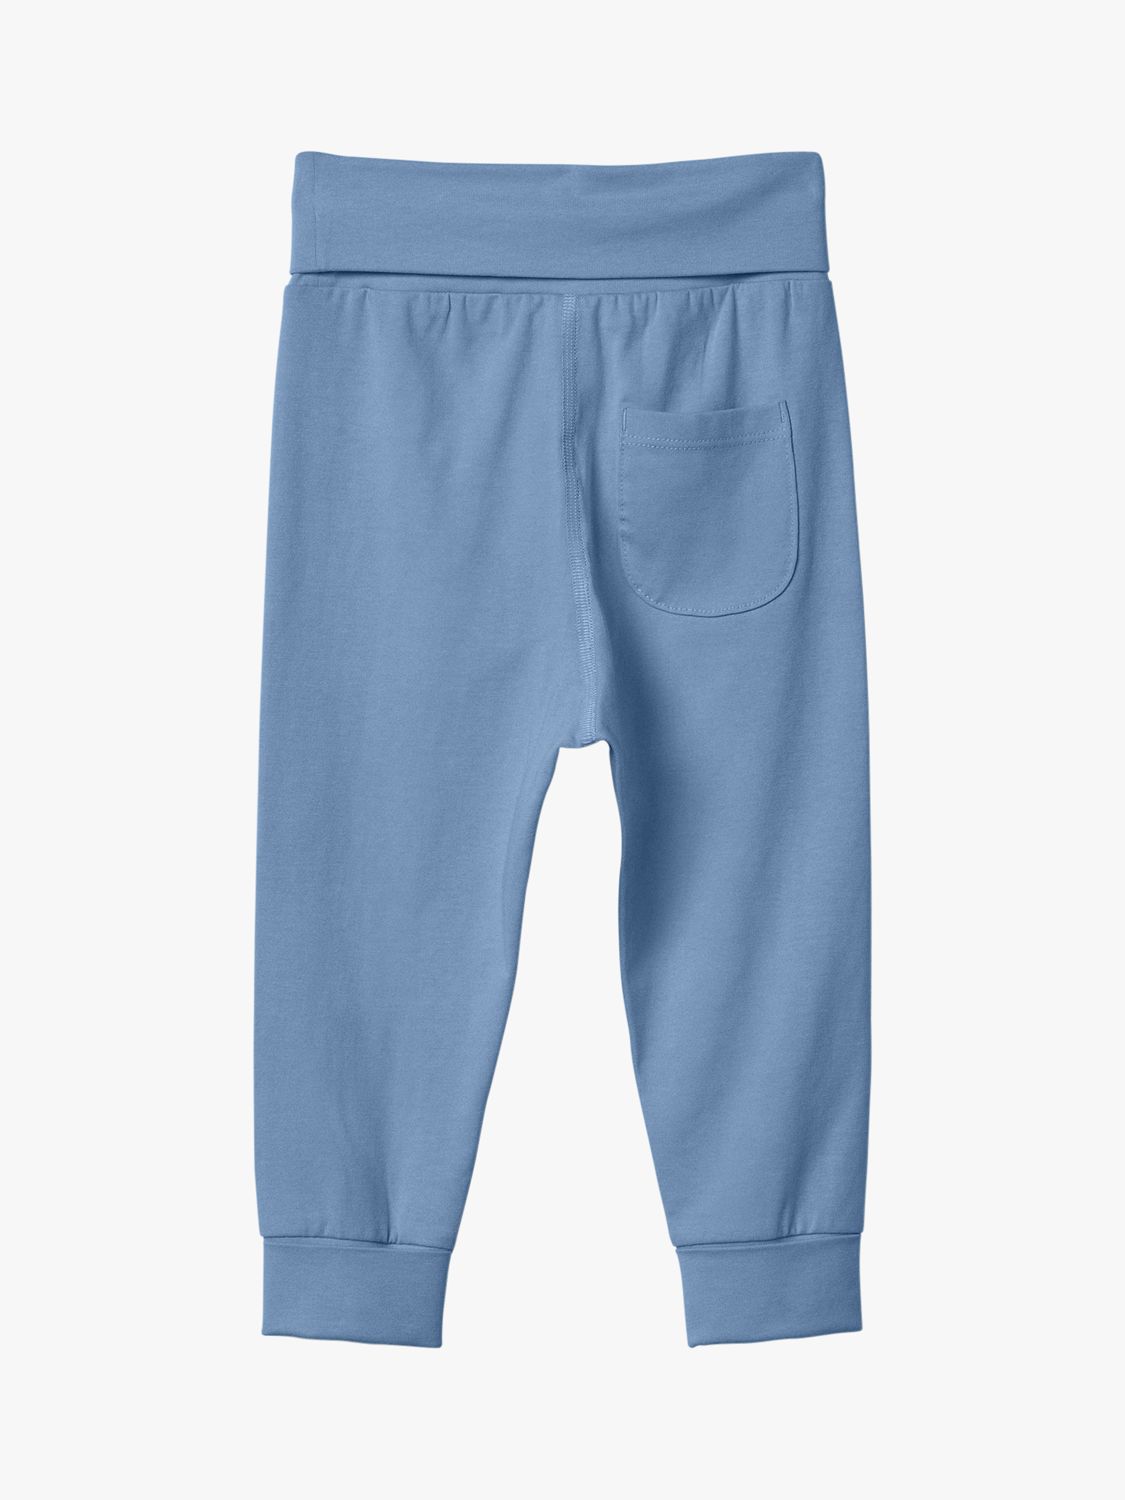 Buy Polarn O. Pyret Baby GOTS Organic Cotton Blend Trousers Online at johnlewis.com